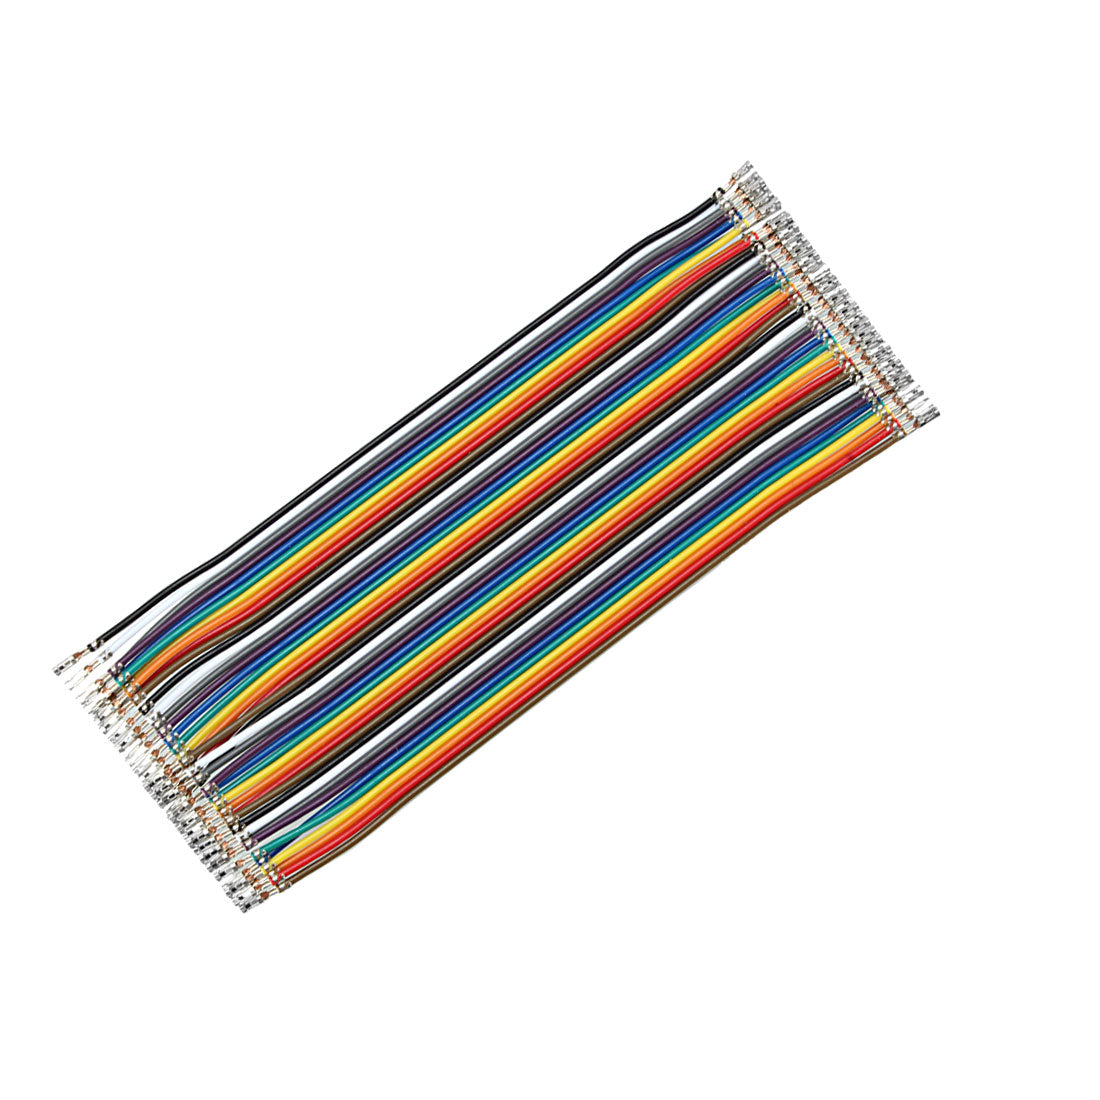 uxcell Uxcell Female to Female 40P Jumper Wire 2.54mm Pitch Ribbon Cable Breadboard DIY 15cm Long